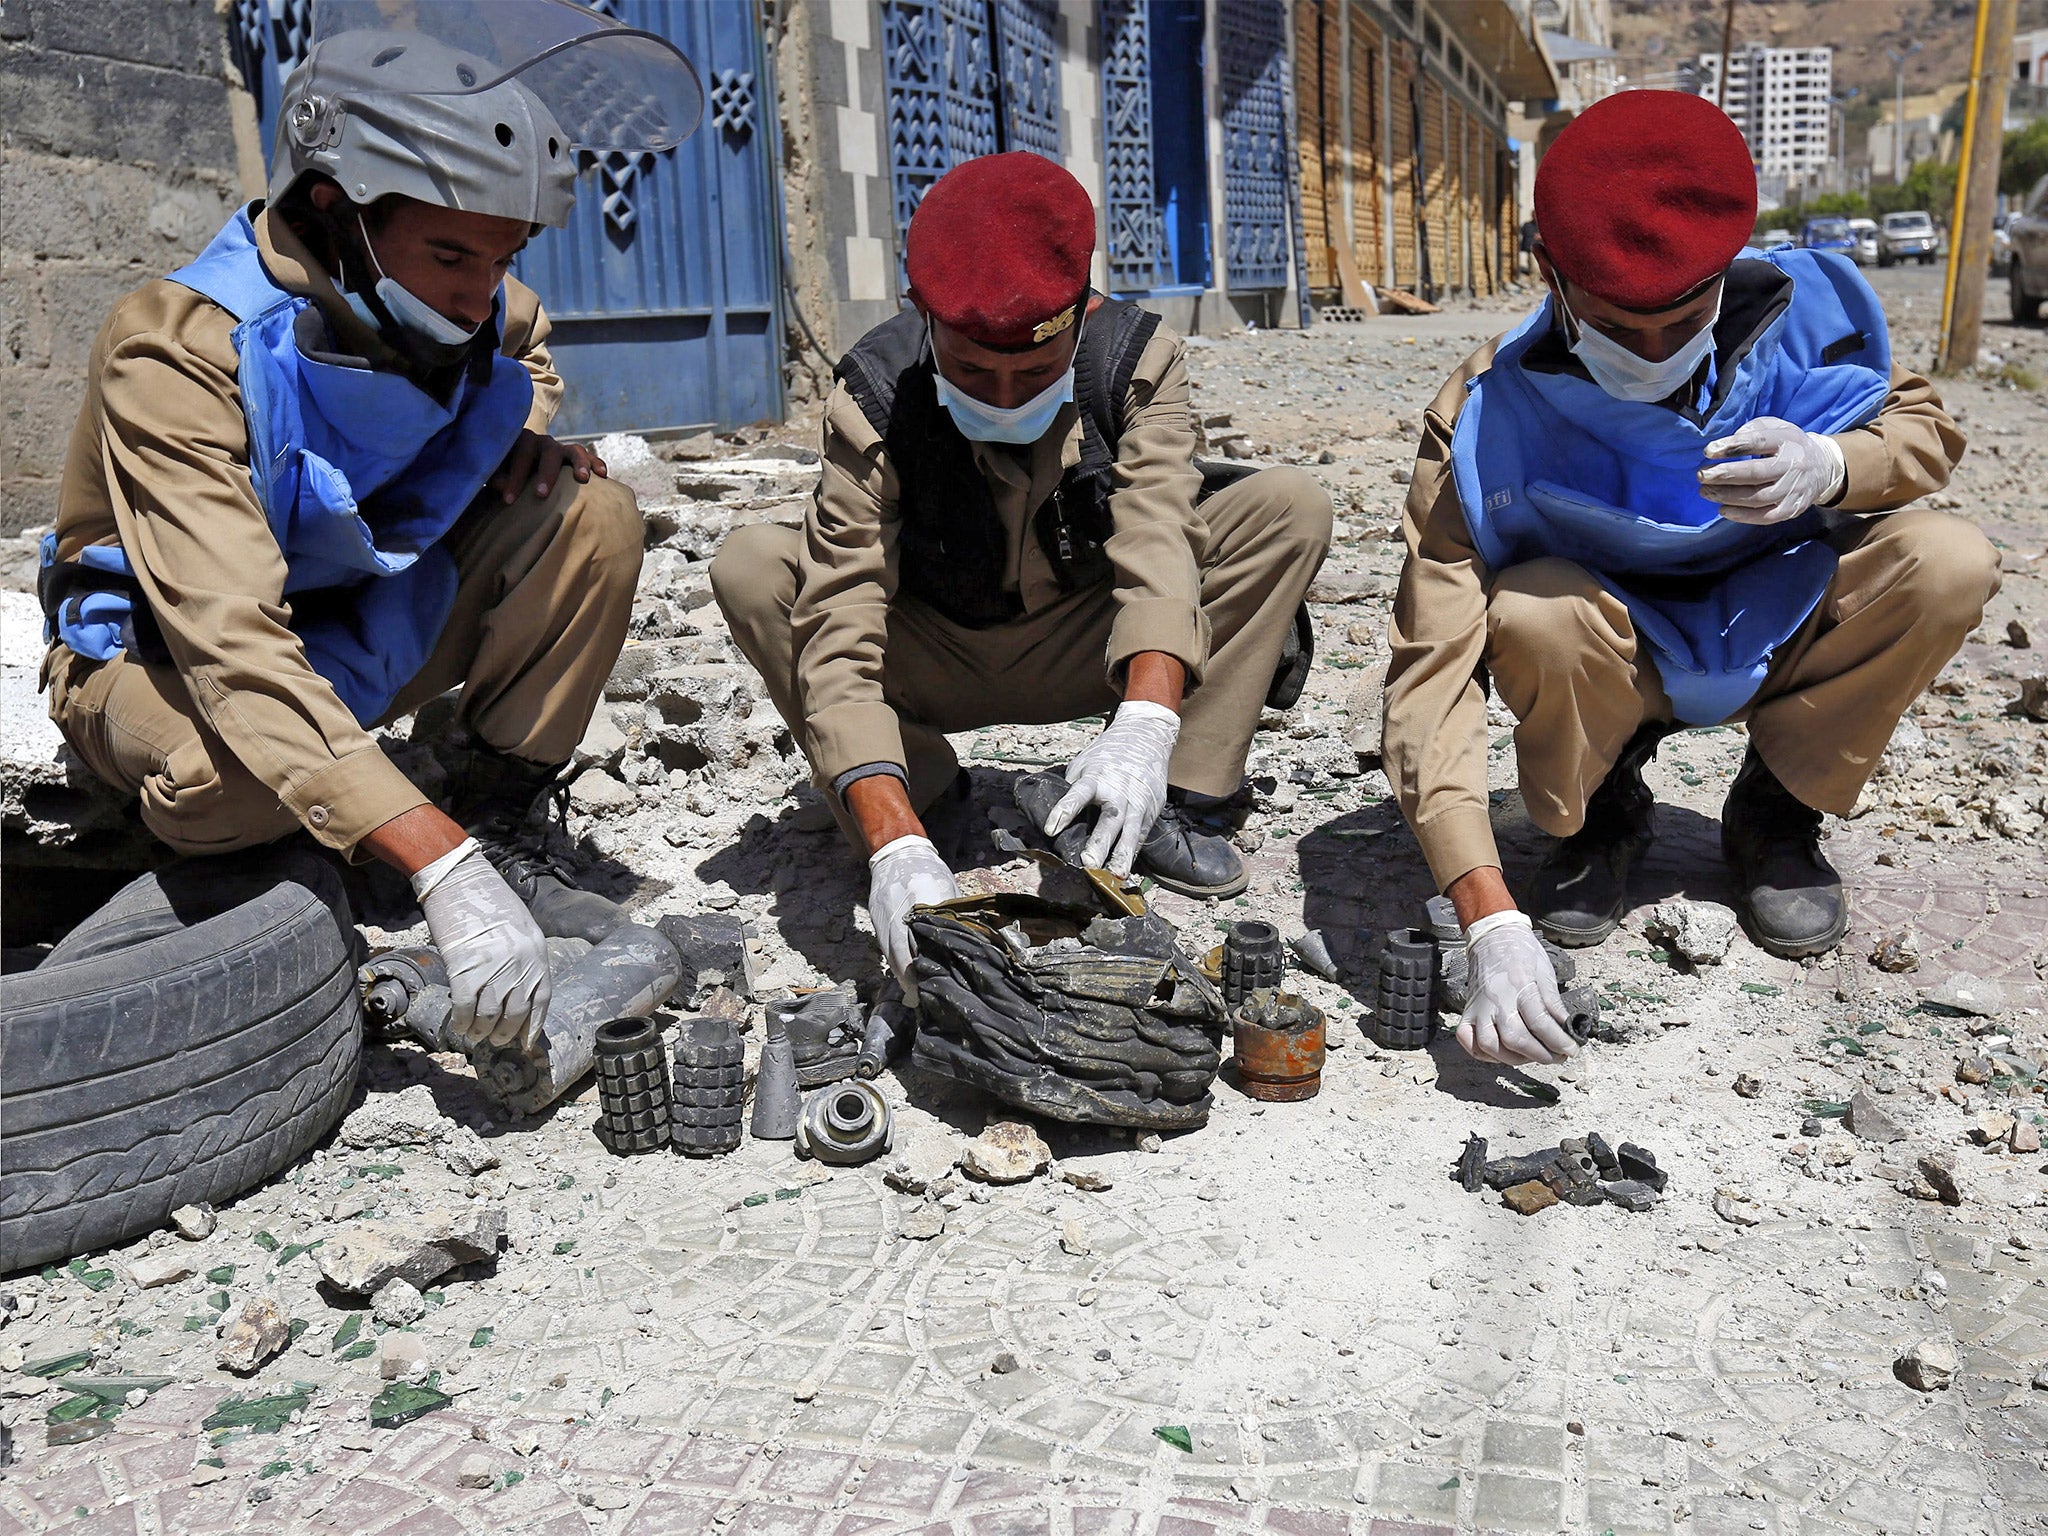 Yemeni soldiers collect mines and explosives at the scene of an airstrike allegedly carried out by the Saudi-led coalition on a nearby Houthi-controlled missile depot in Sanaa